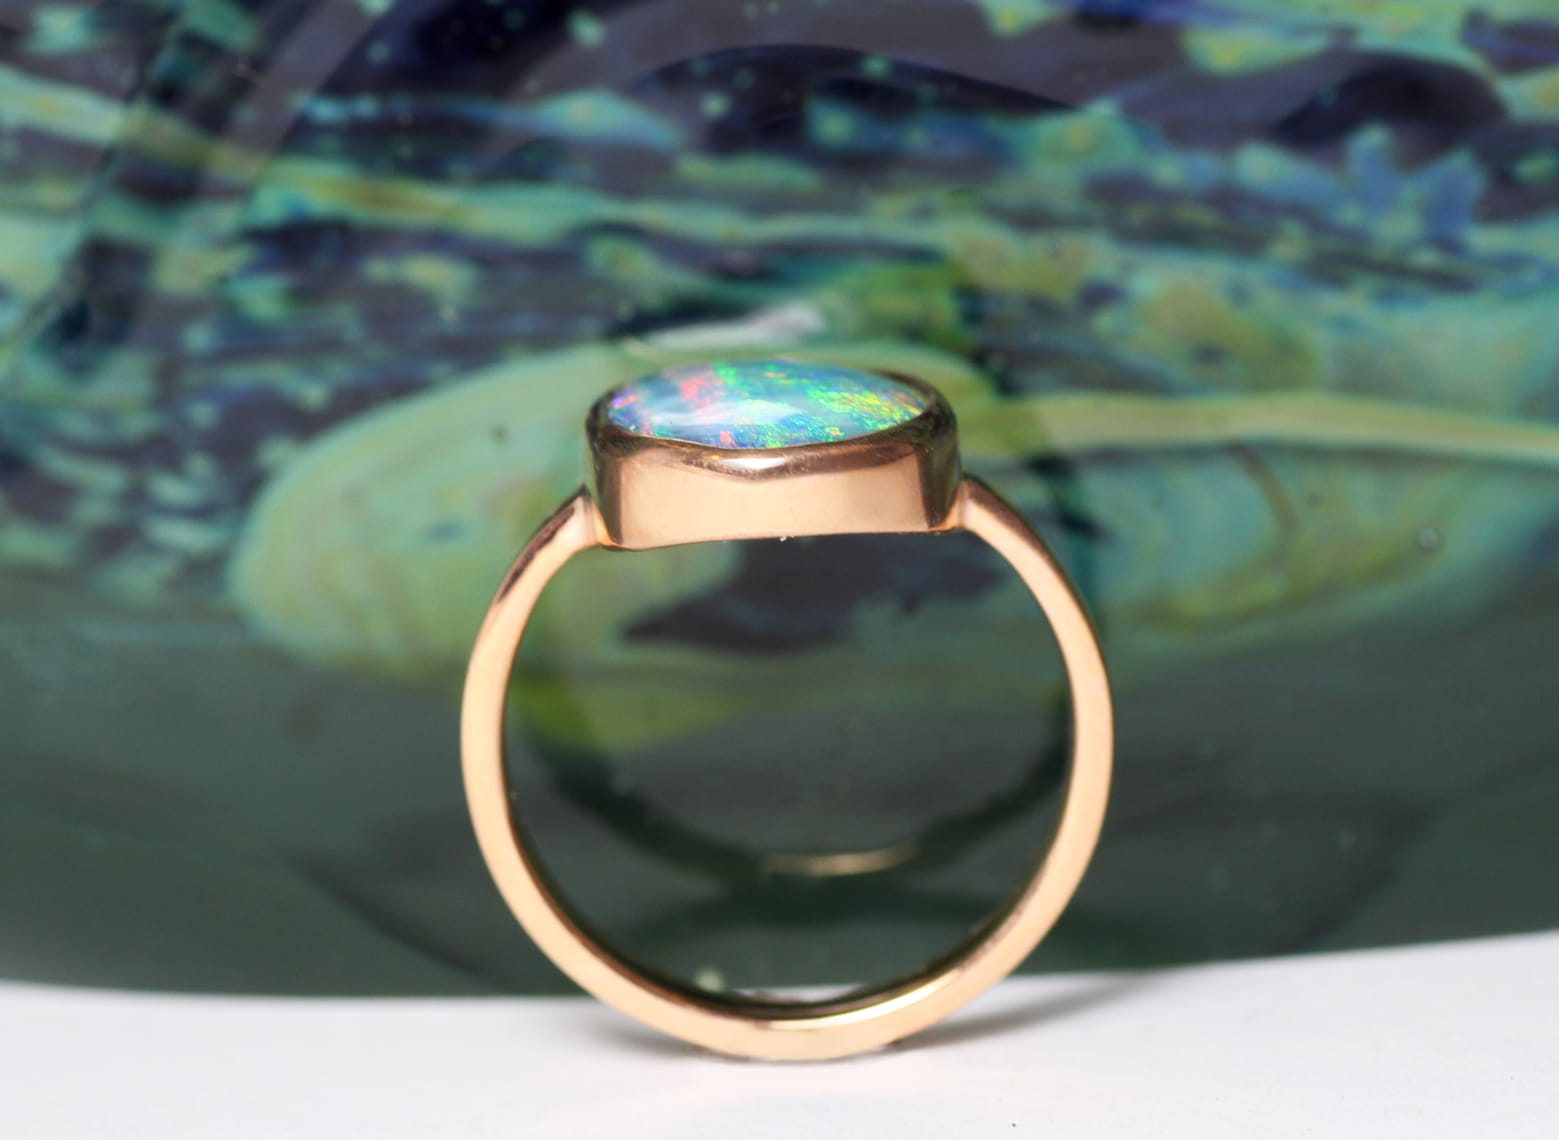 Recycled gold with opal by Zoe Pook Jewellery